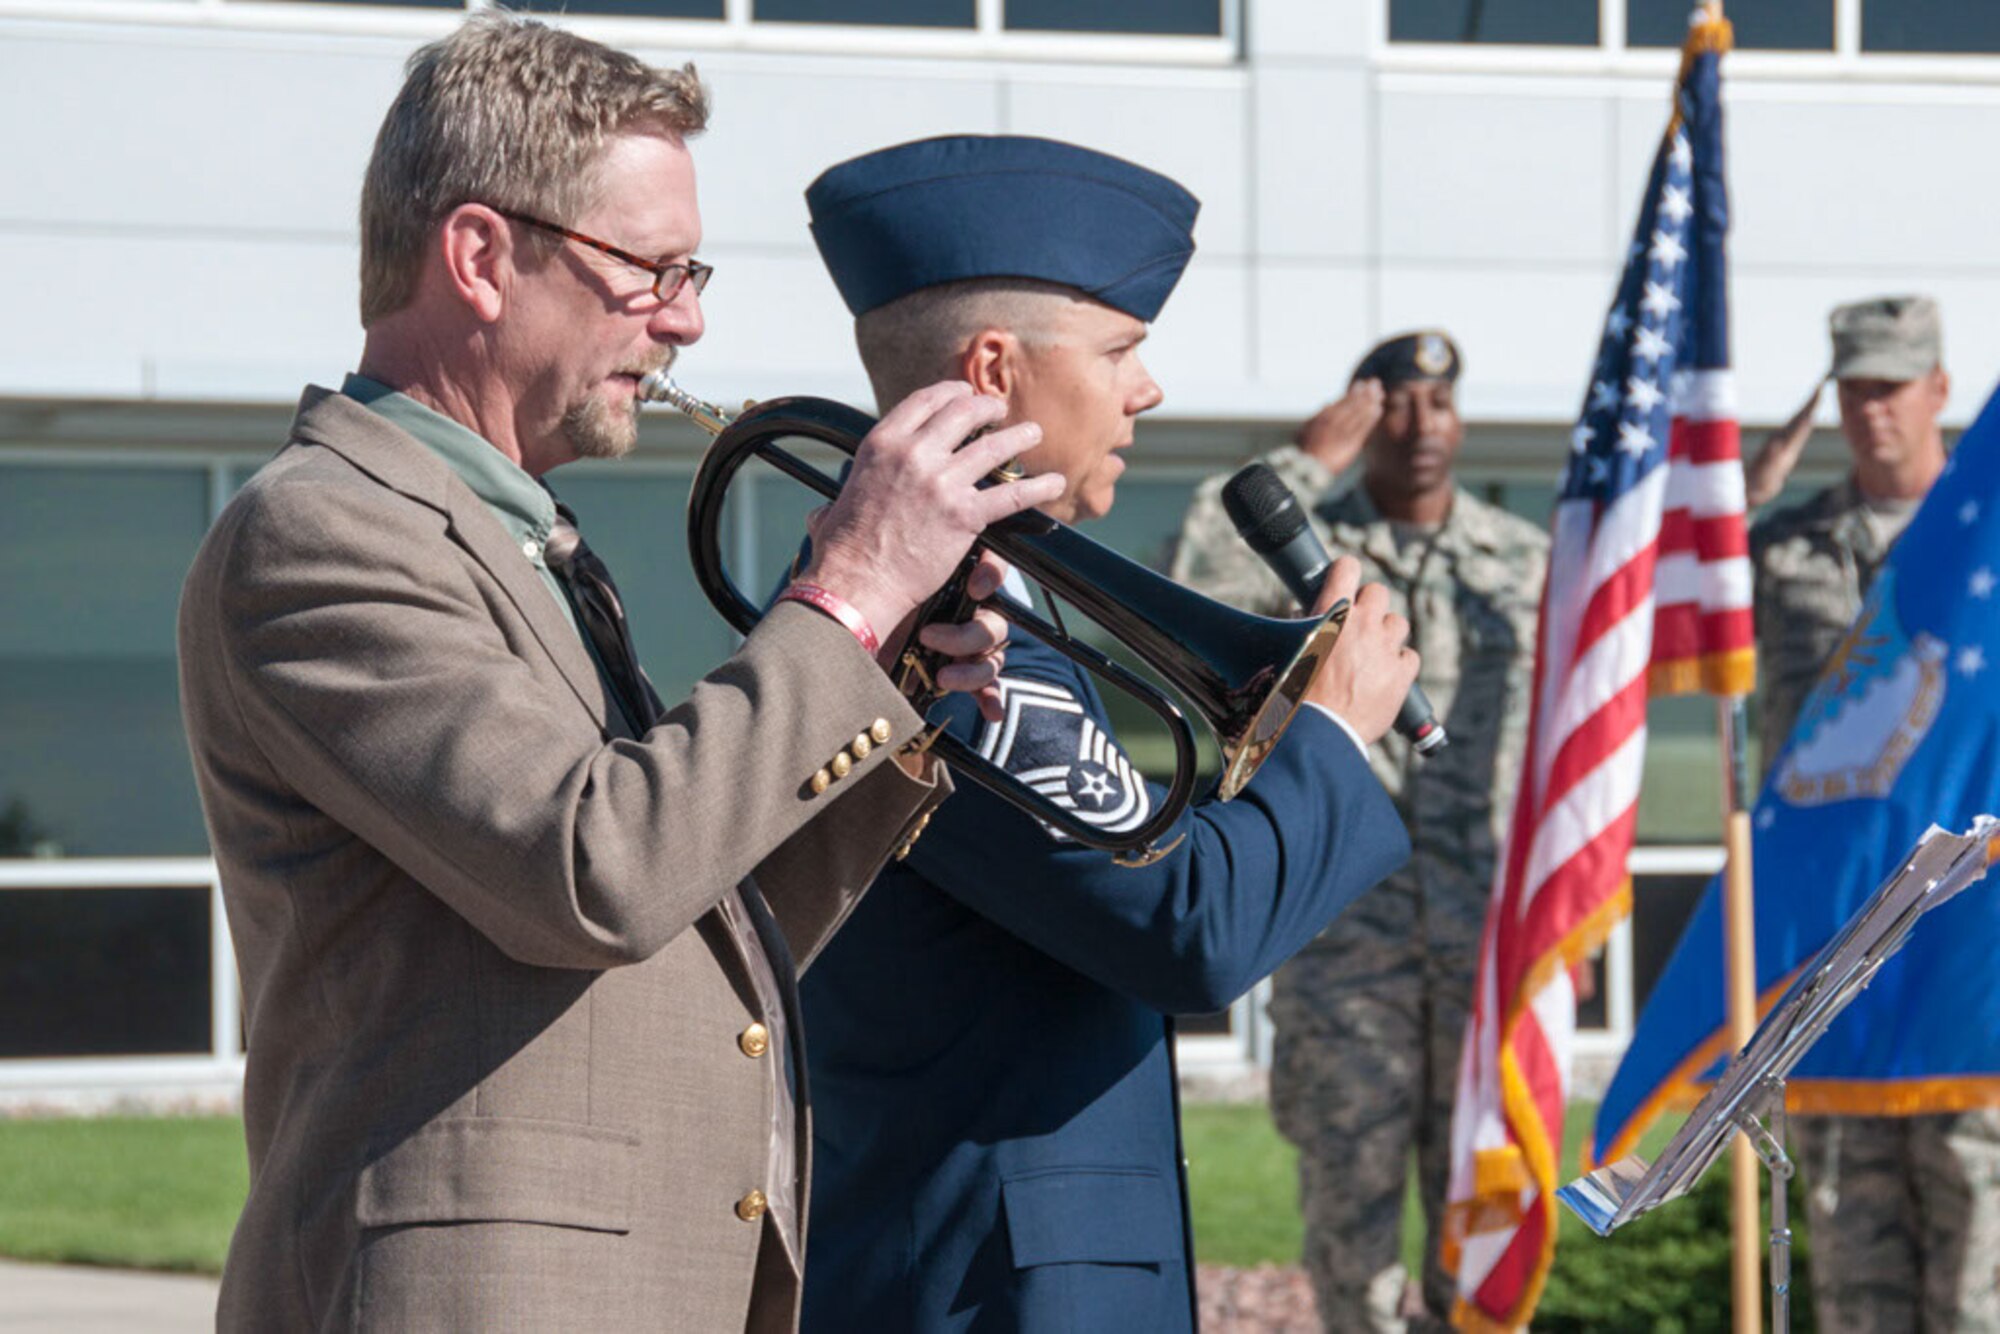 James Crosby on trumpet alongside Senior Master Sgt. Jason Gravitt perform the national anthem during the opening ceremony celebrating the 310th Mission Support Group’s movement to the Headquarters building for the 310th Space Wing on Schriever AFB, Colo., Aug. 7, 2016.